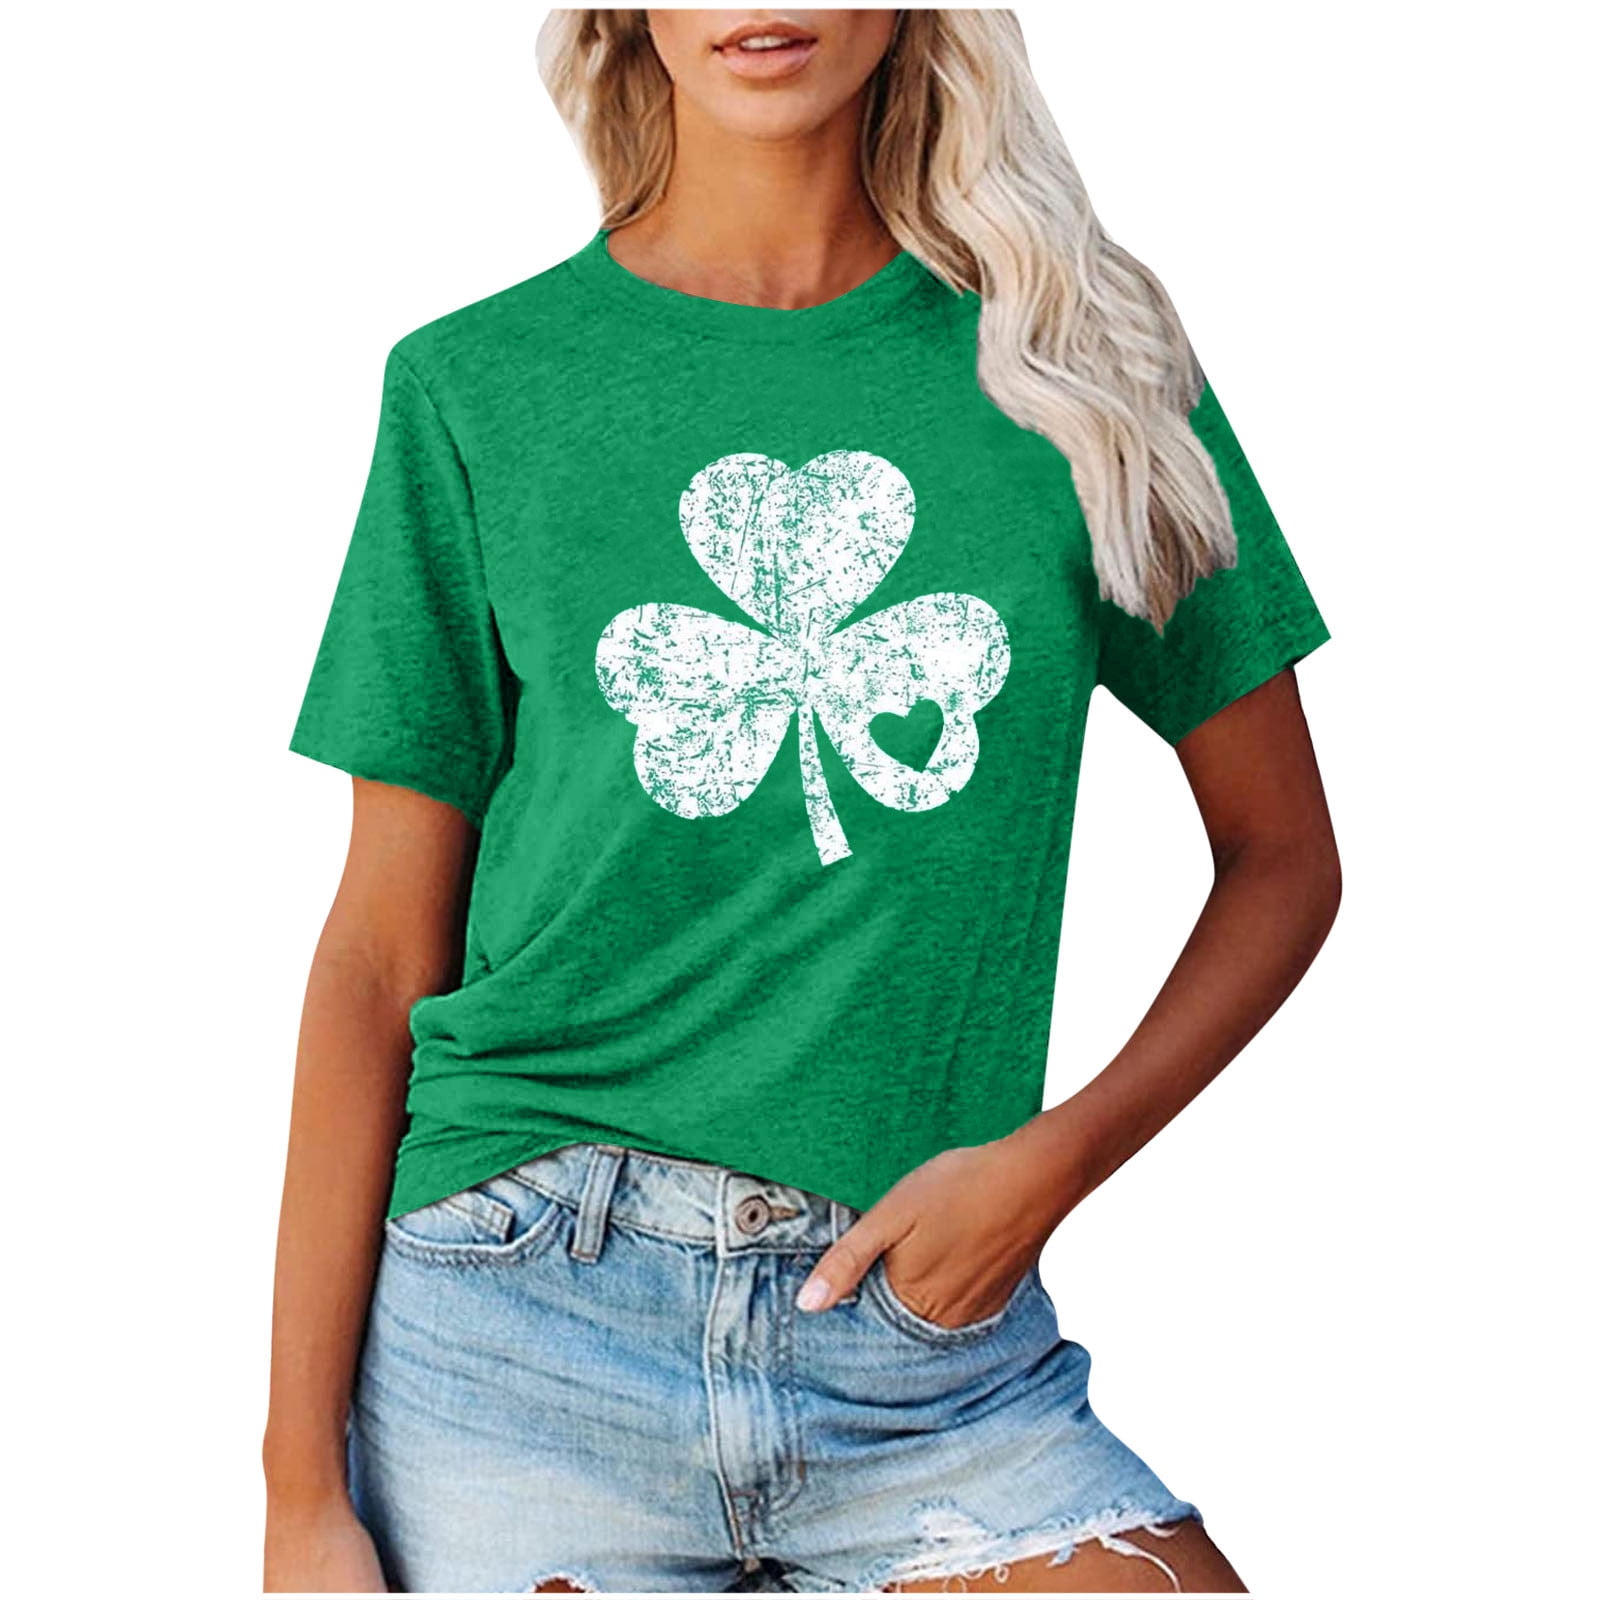 St Patricks Day Shirts for Women Shirts Blouse Short Sleeve O-Neck T-Shirts Summer Casual Loose Fit Cute Tops 